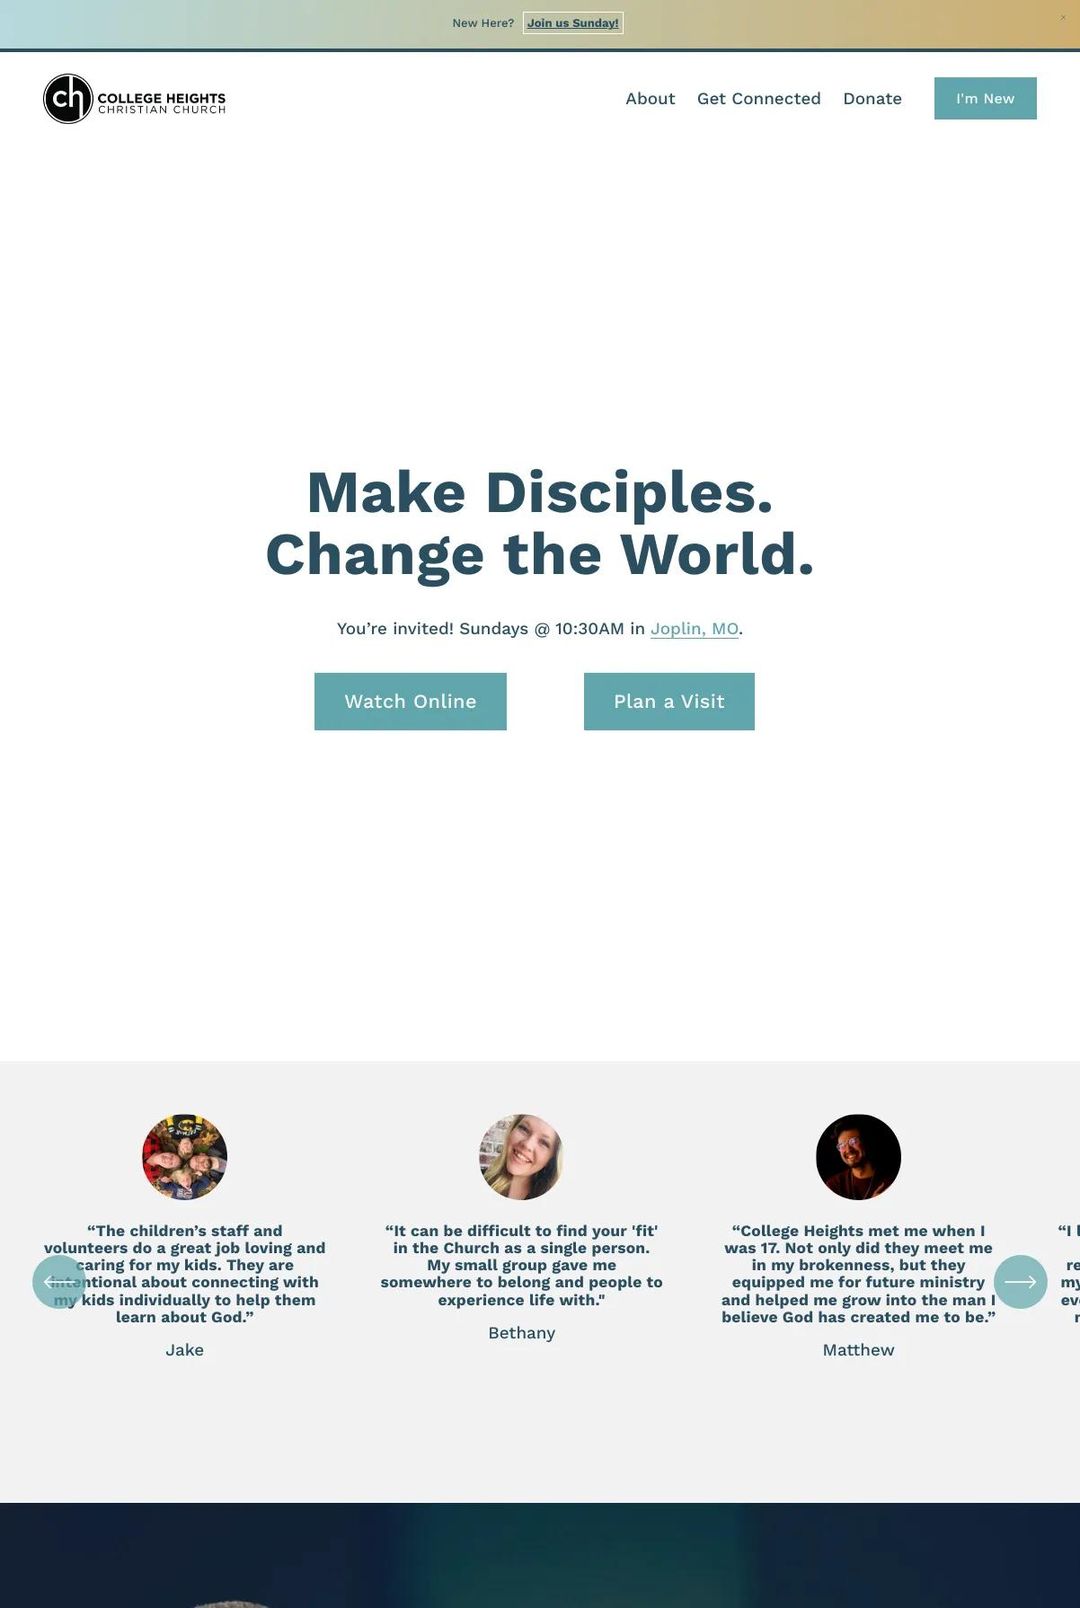 Screenshot 1 of College Heights Christian Church (Example Squarespace Church Website)